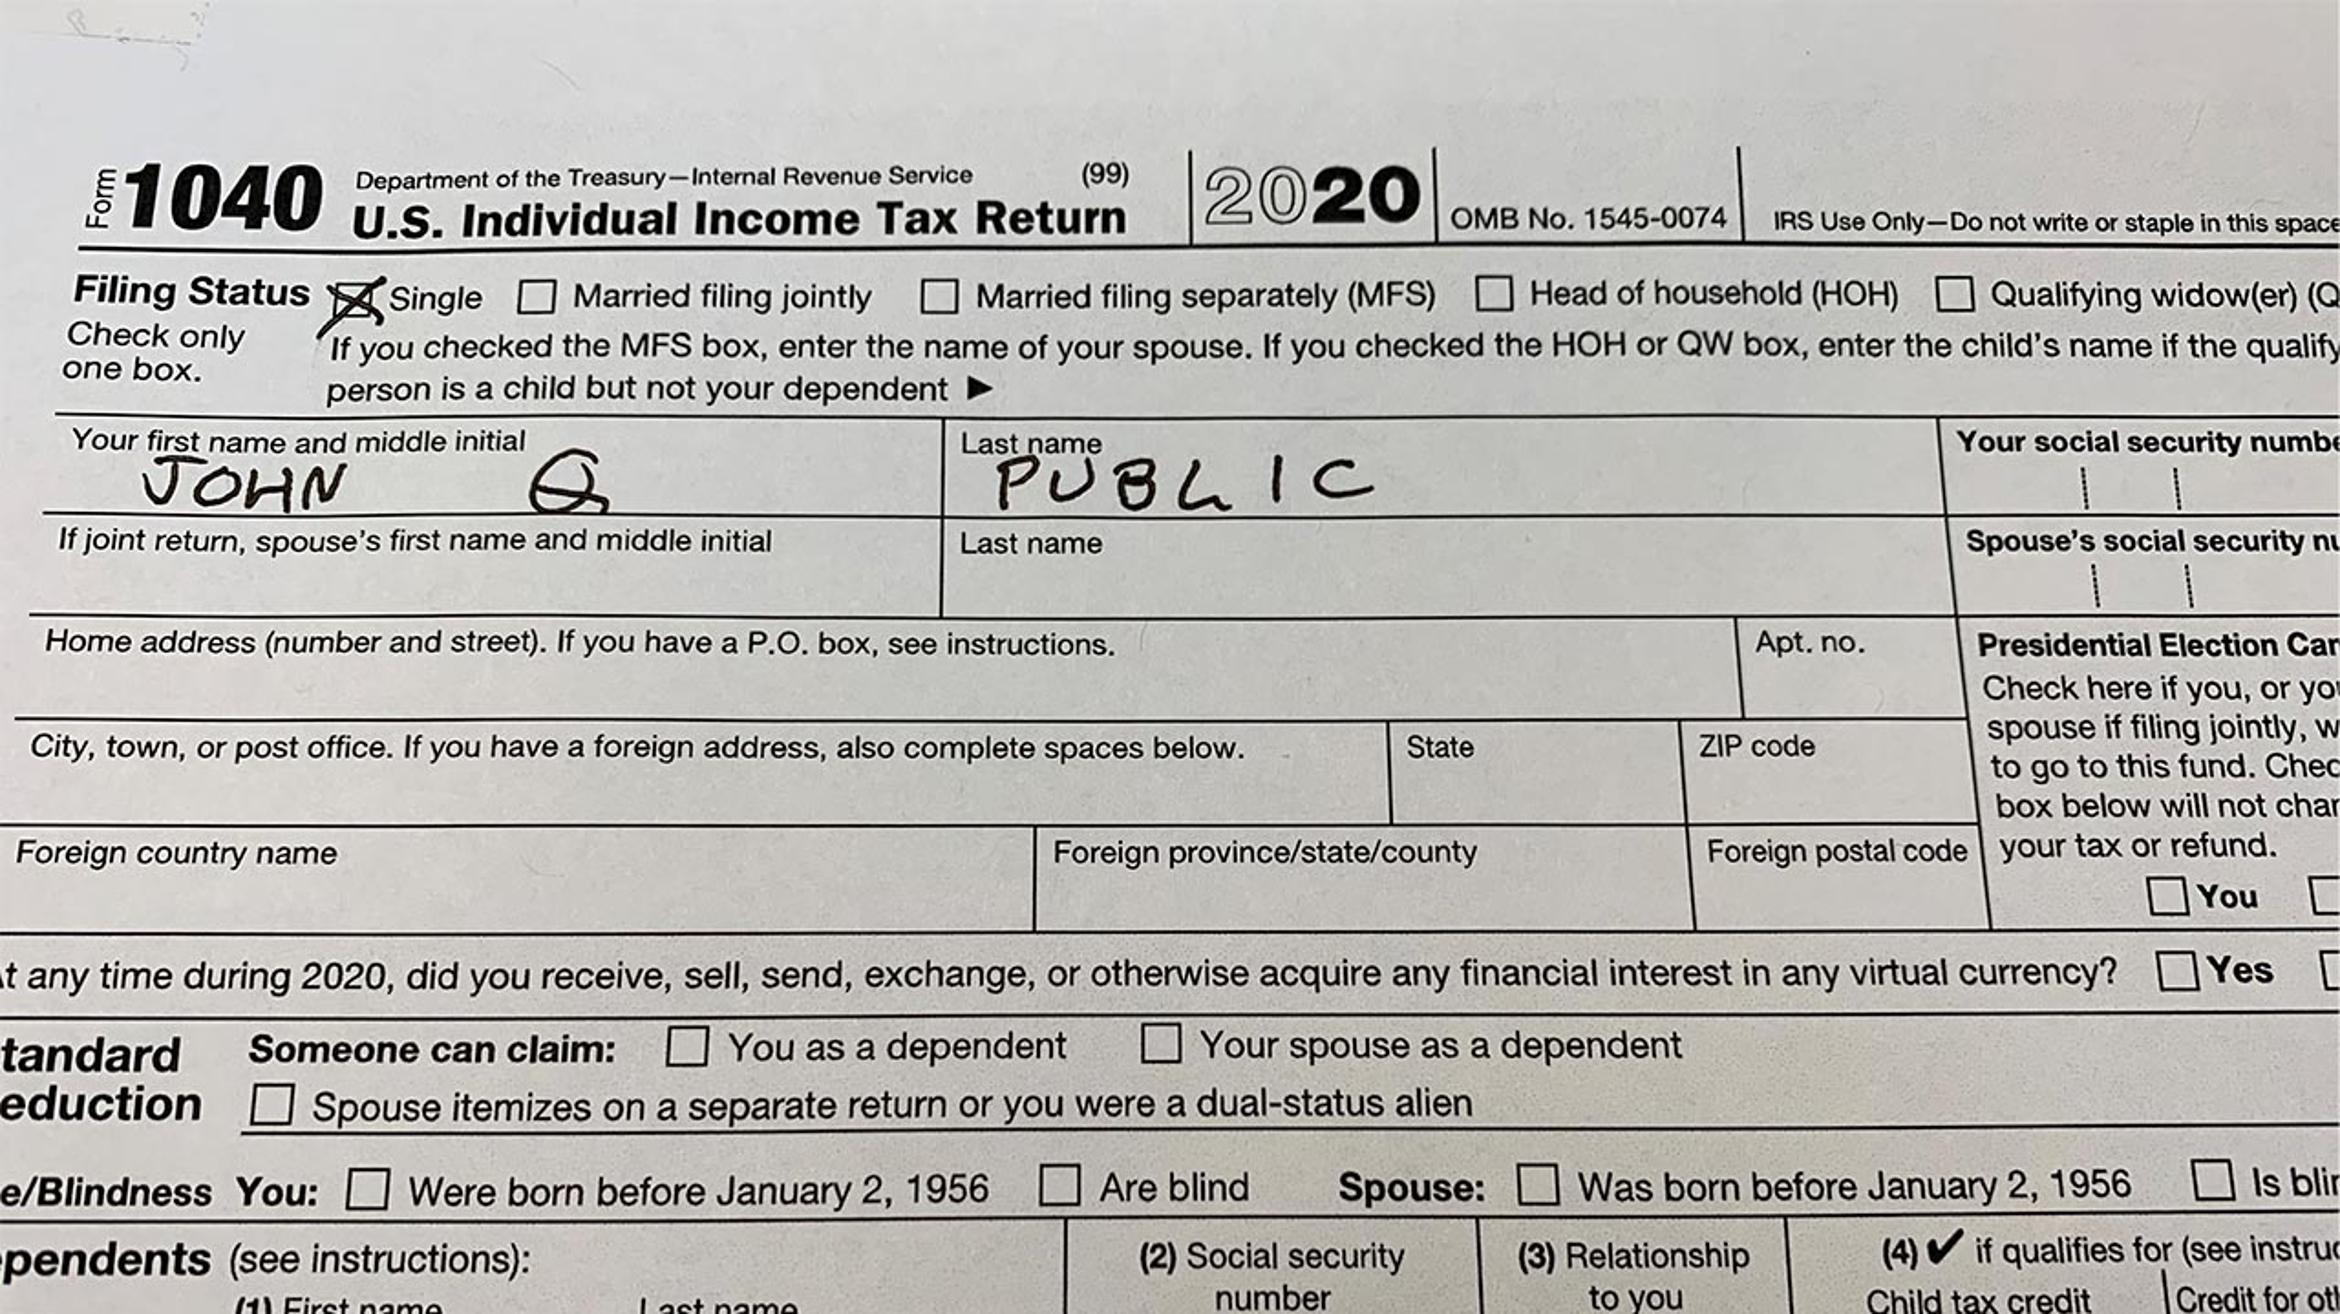 The Irs Begins Income Tax Season While Dealing With Lingering Covid 19 Delays Wdet